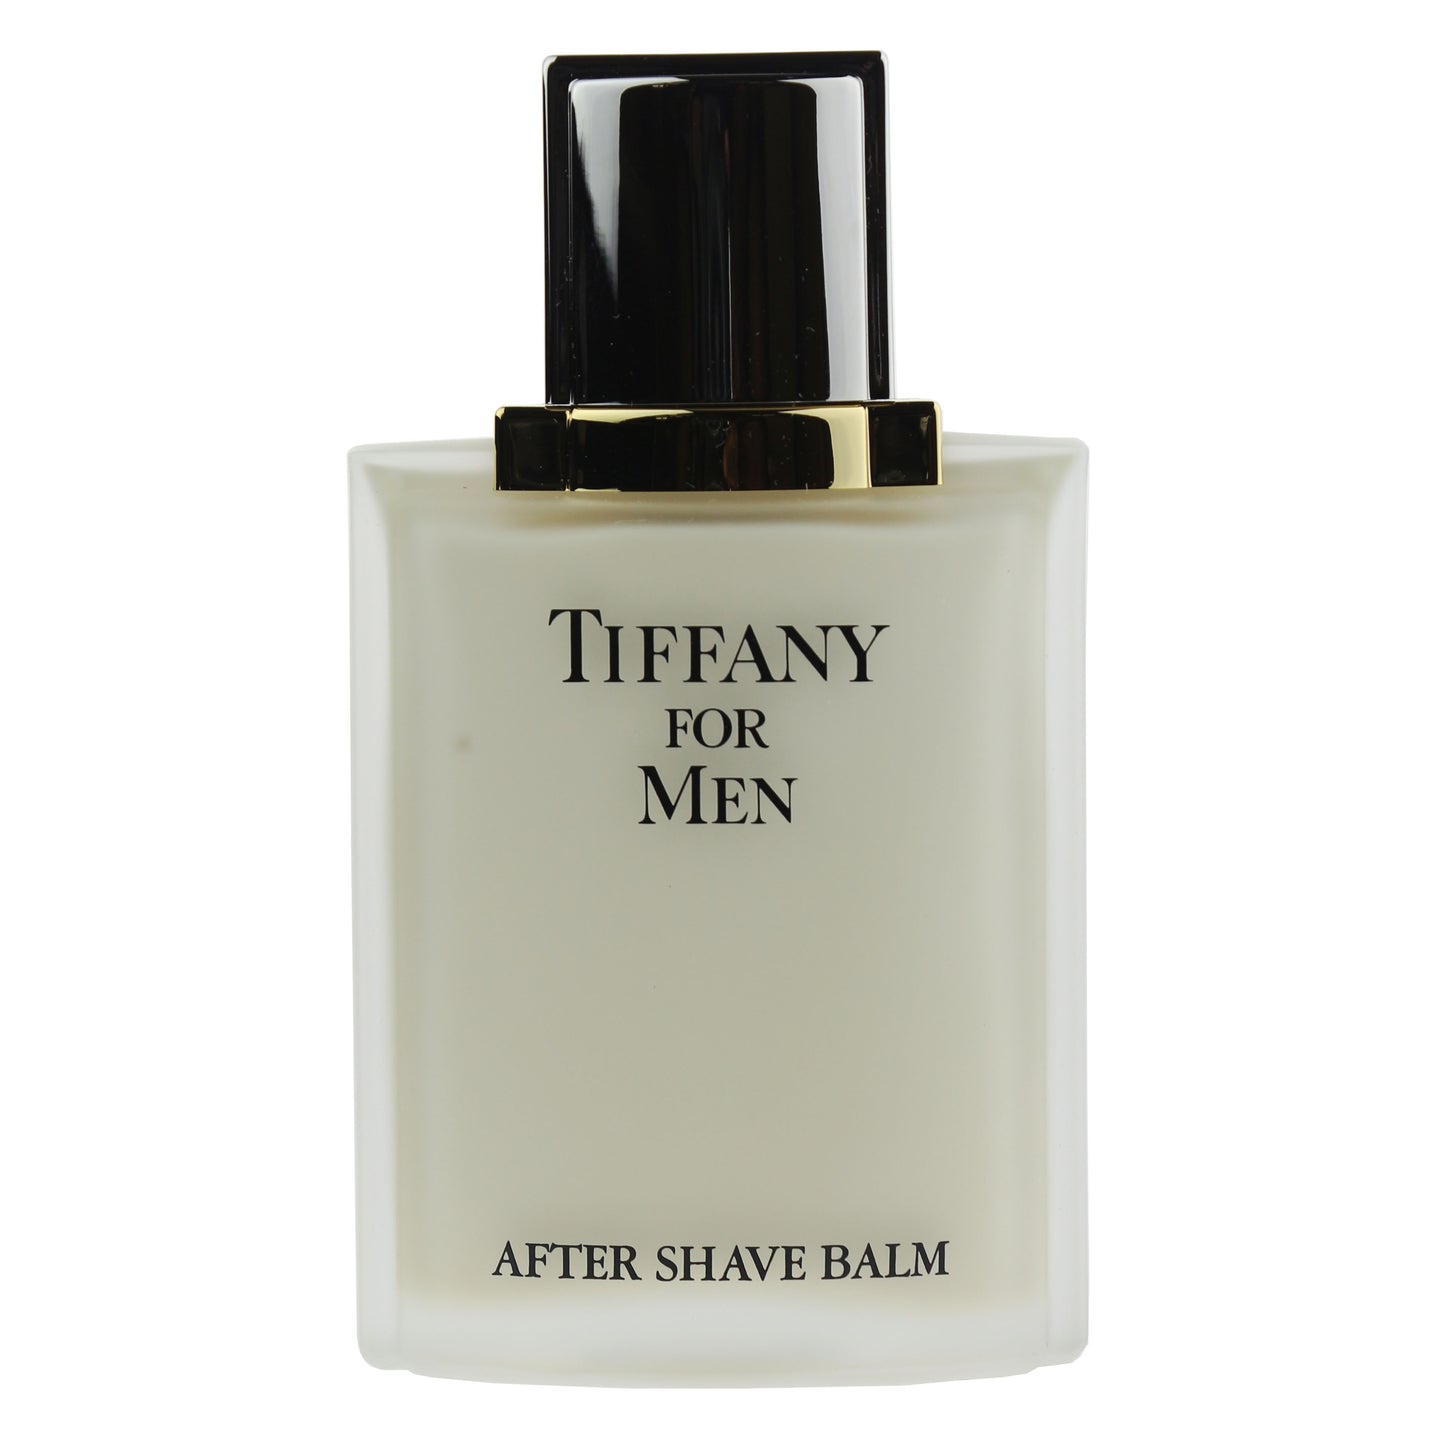 Tiffany For Men After Shave Balm 3.4oz/100ml In Box